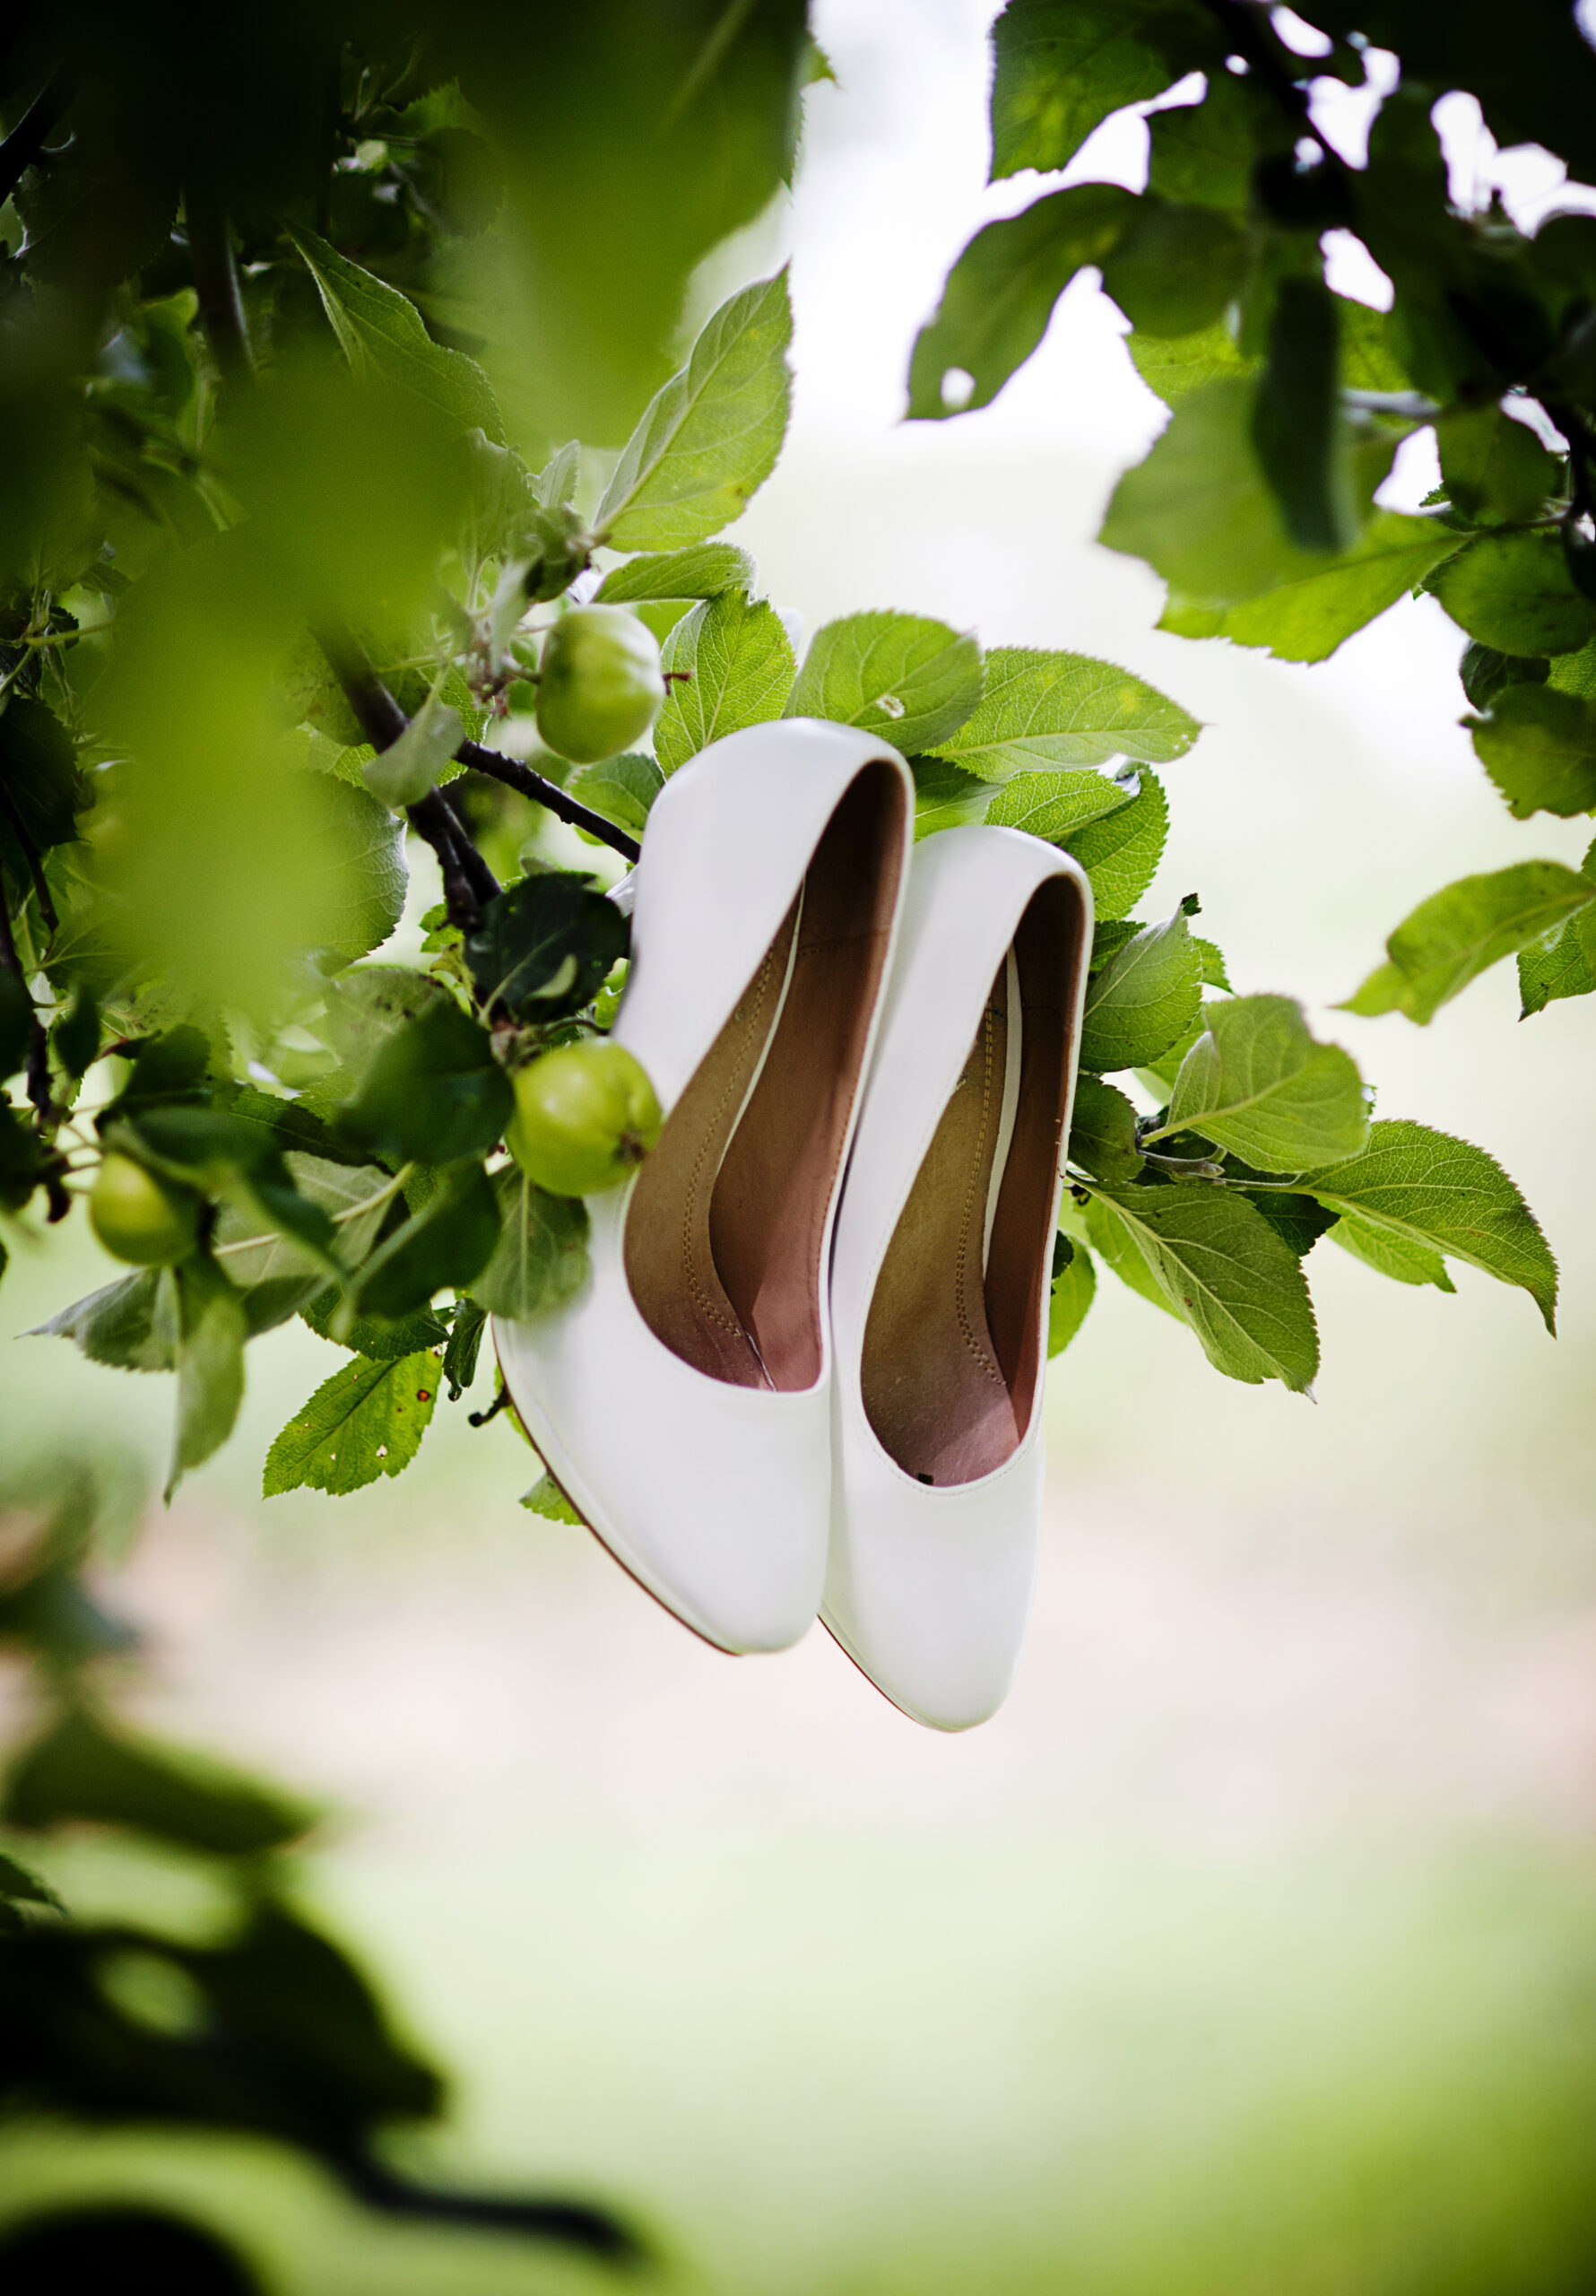 Photograph of a beautiful wedding shoes ready for bride